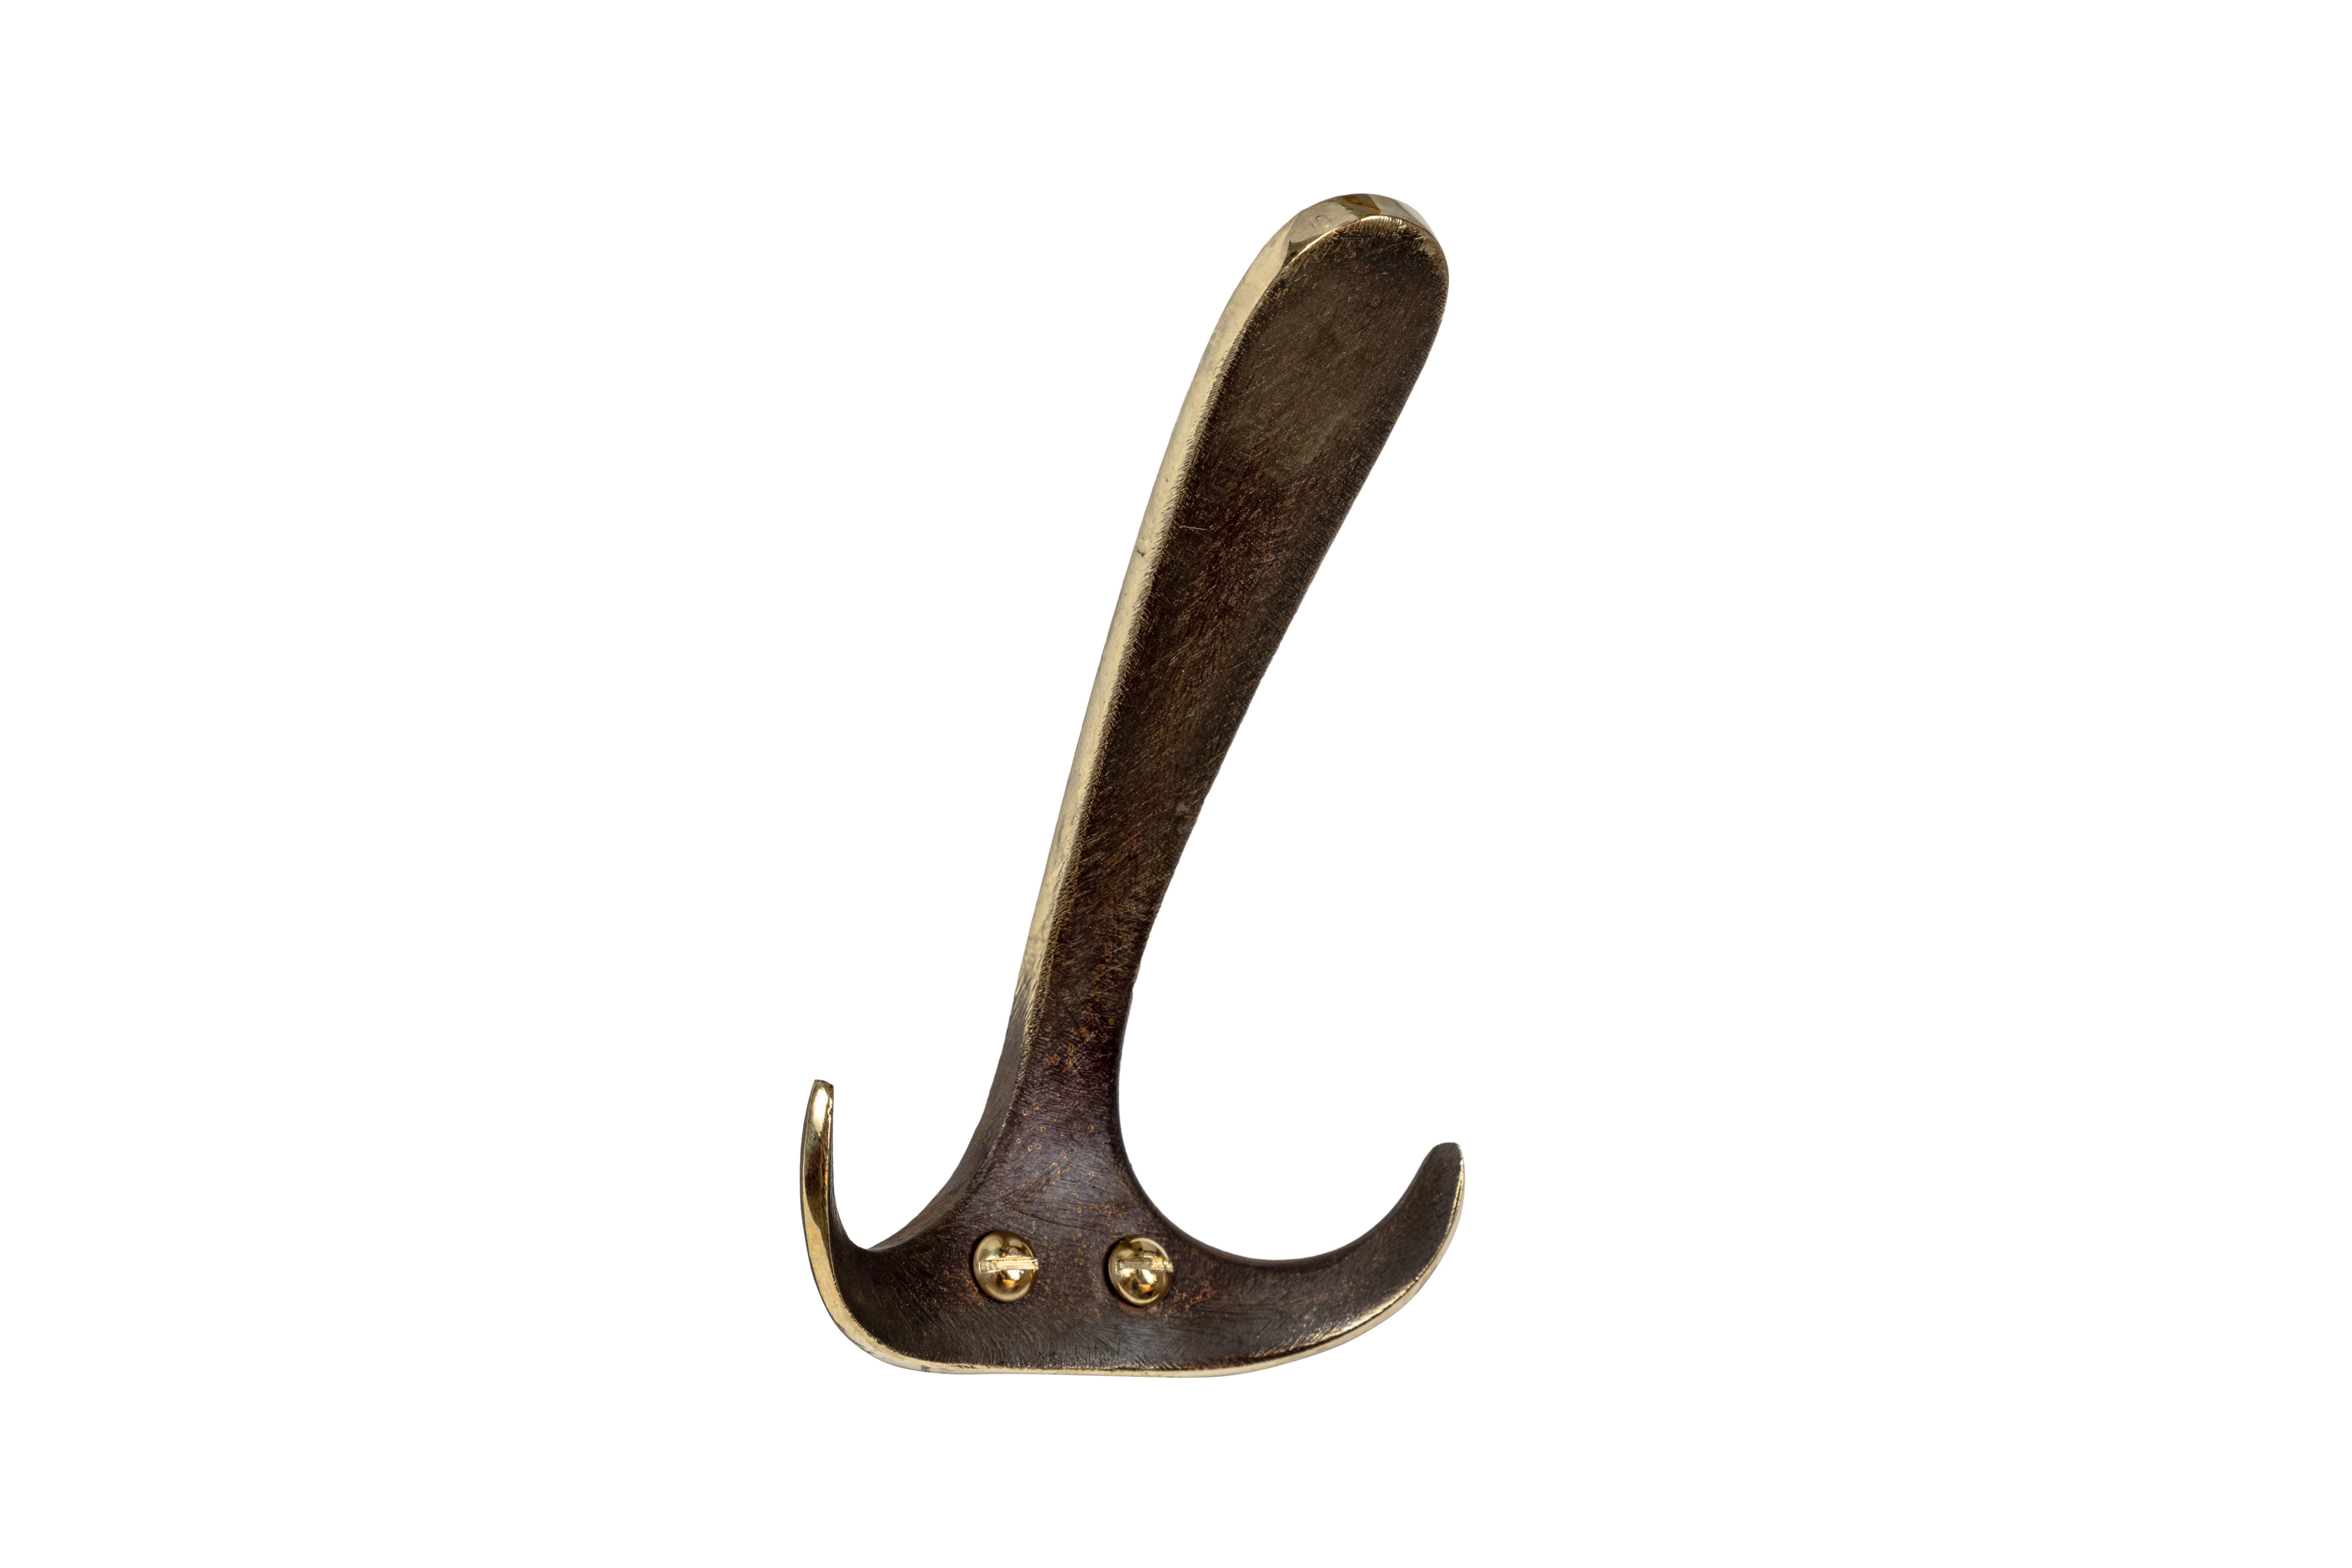 Carl Auböck model #4982 patinated brass hook. Designed in the 1950s, this versatile and minimalist Viennese hook is executed in patinated brass by Werkstätte Carl Auböck, Austria.

Produced by Carl Auböck IV in the original Auböck workshop in the